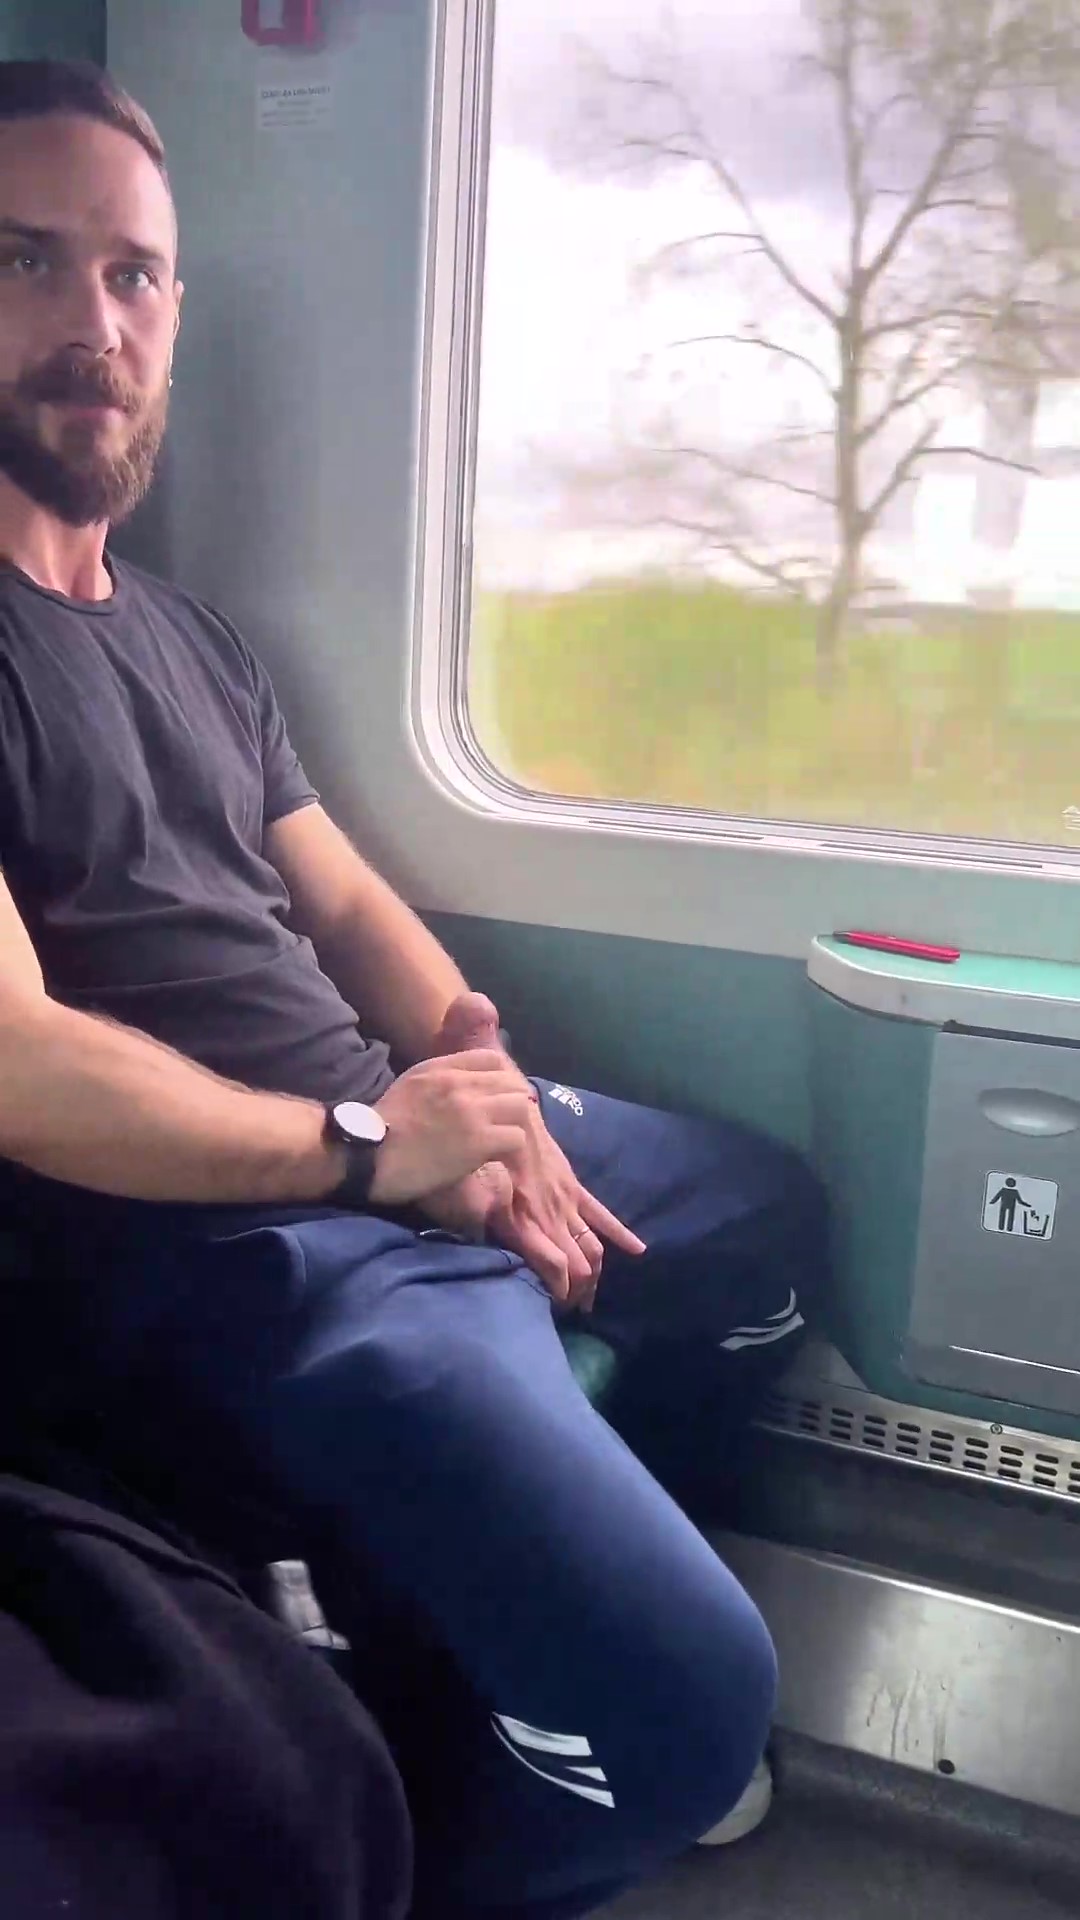 fit scally guy wanks and cums on the train